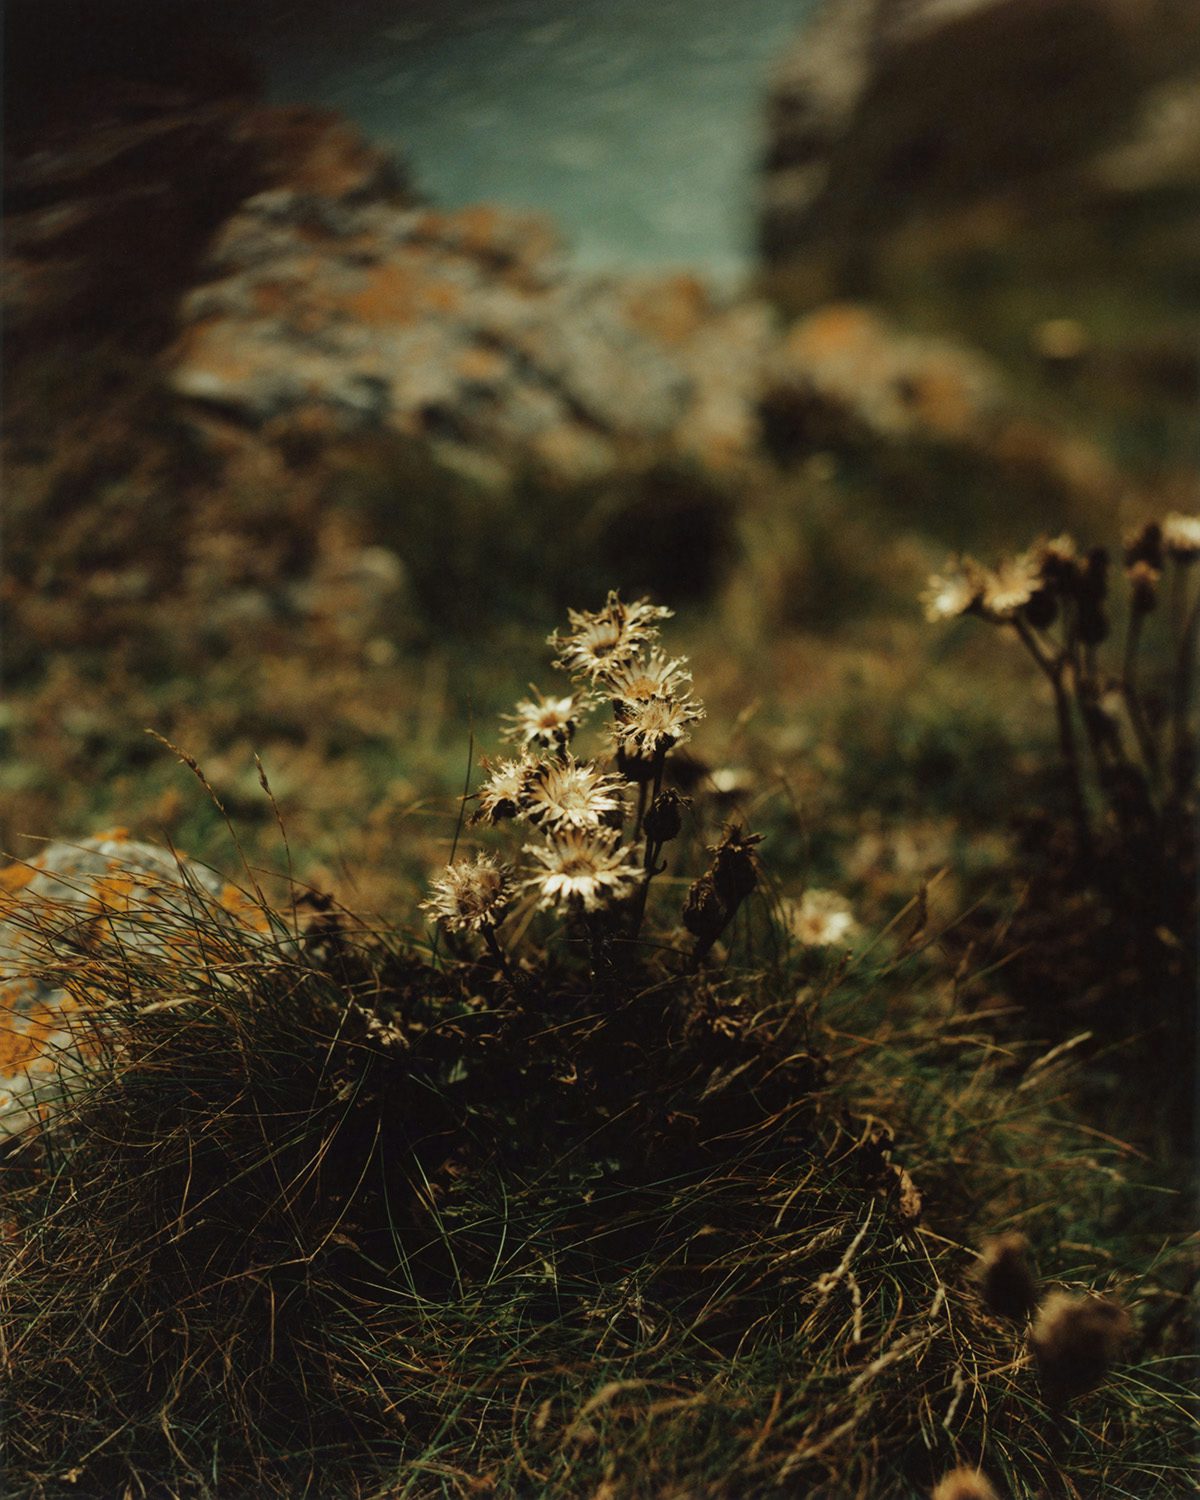 Photograph from Folly by Jamie Murray showing grassy earth and plantlife with white petal-like tops